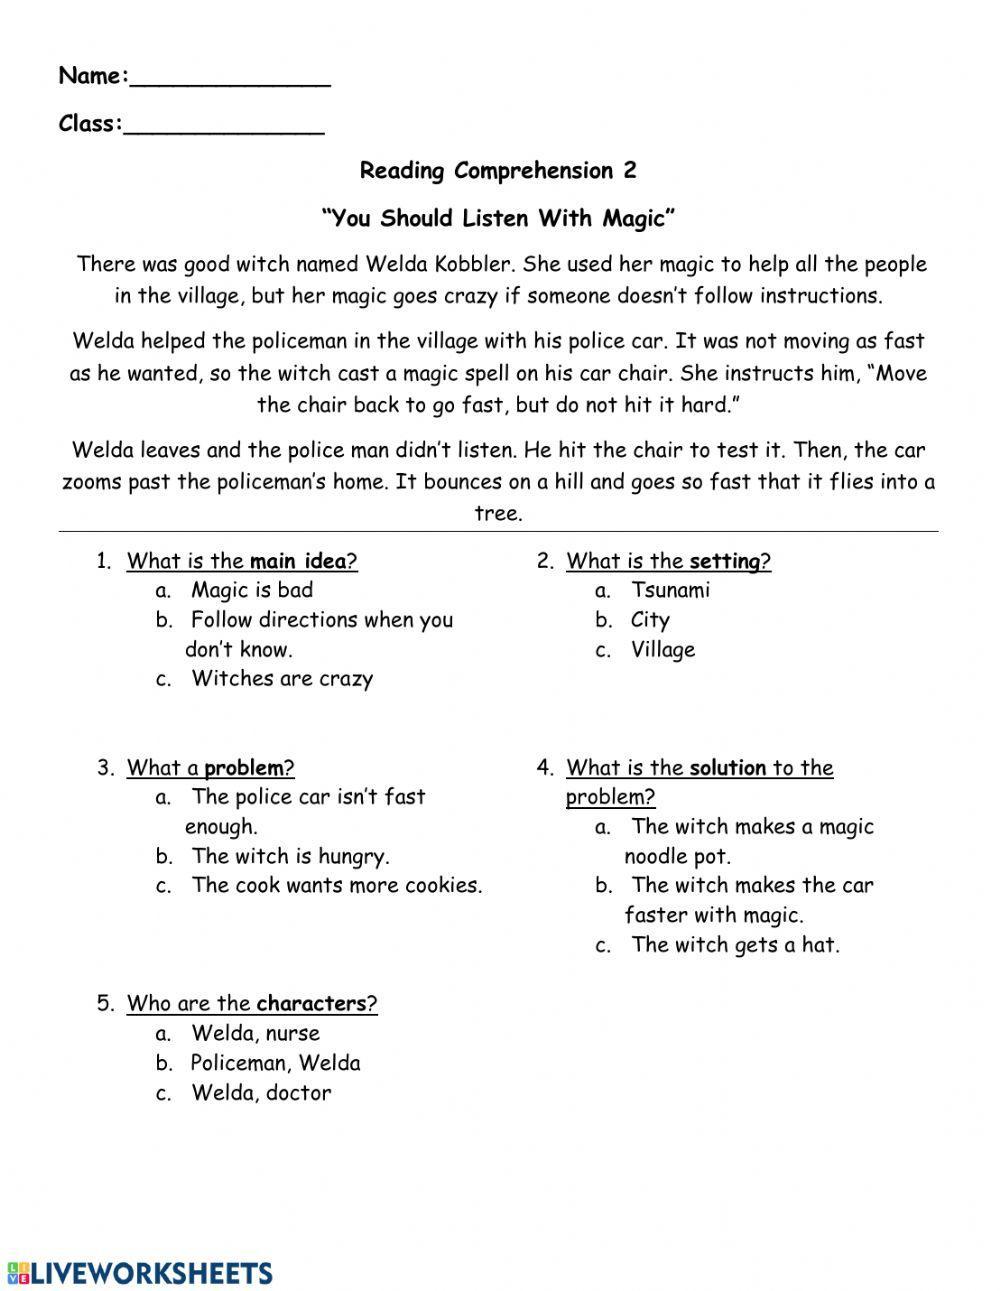 Reading comprehension - Follow directions